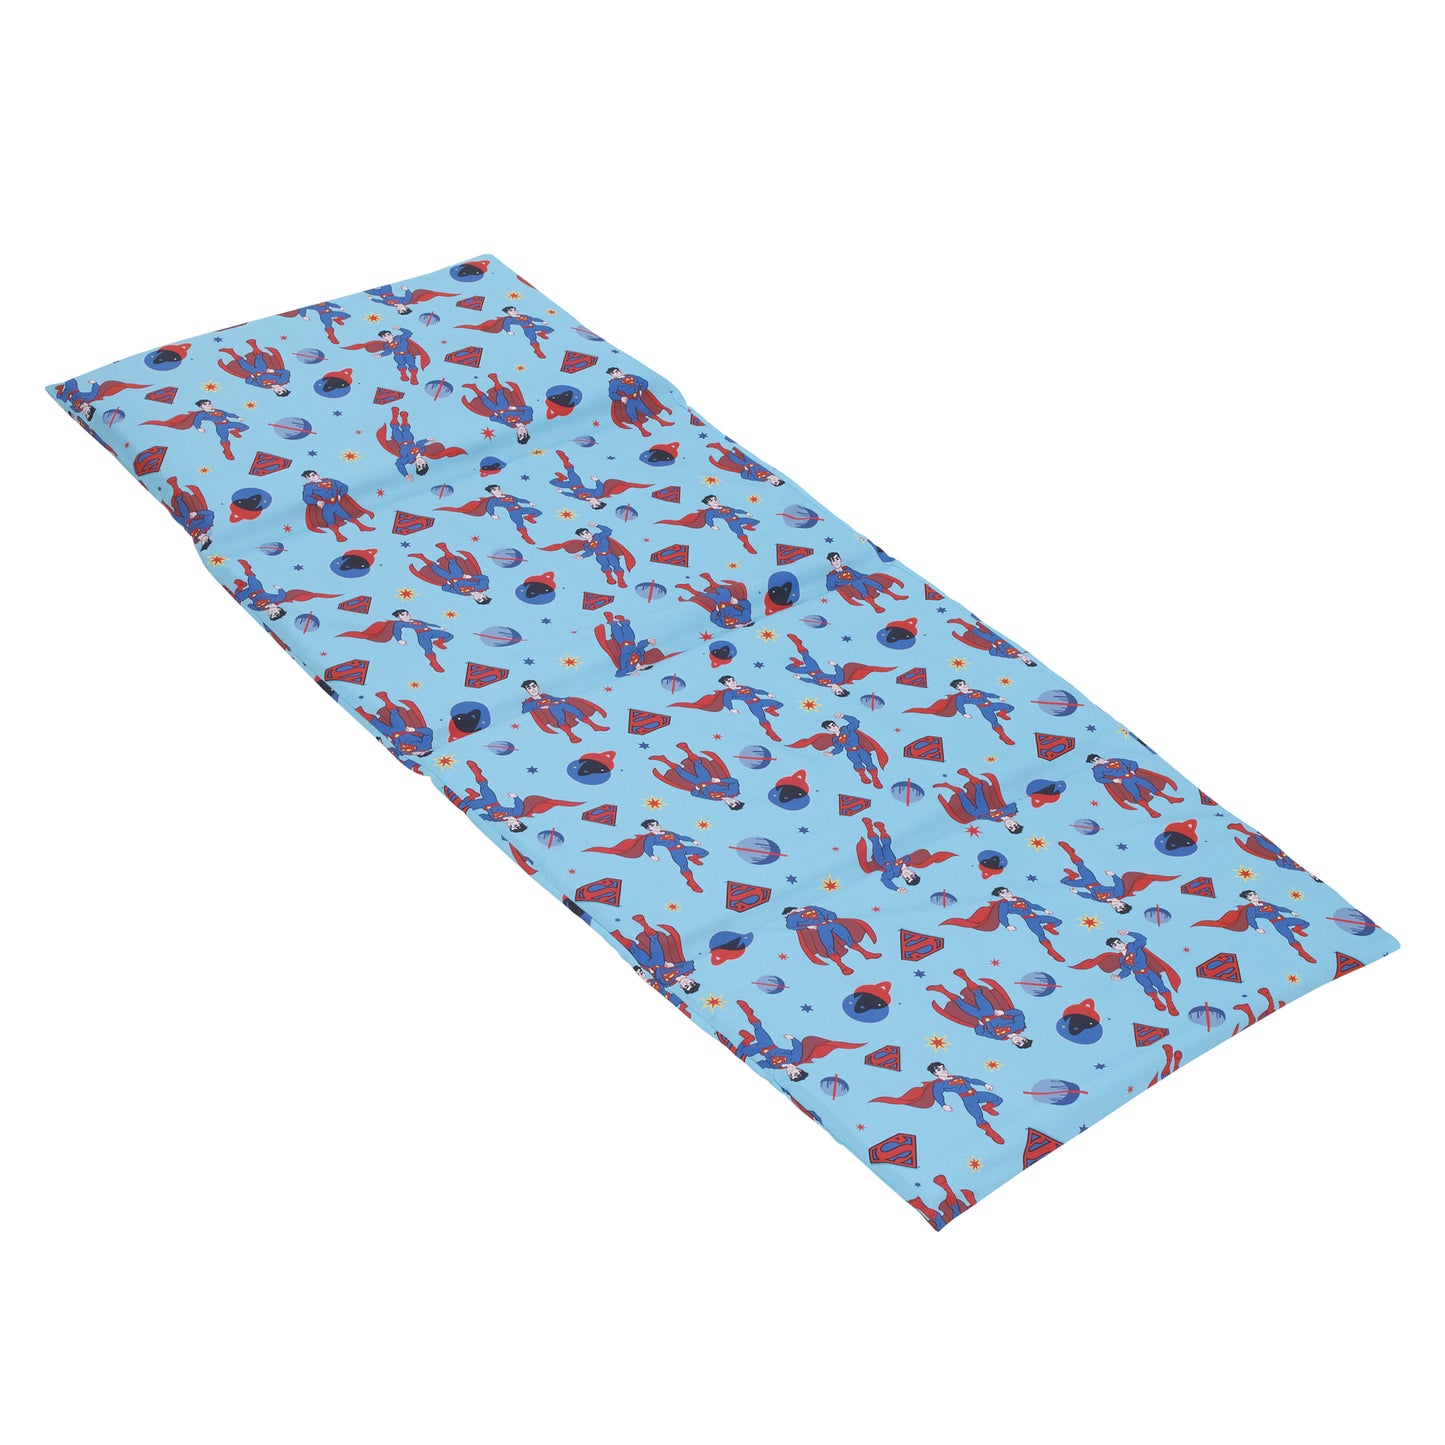 Warner Brothers Superman Blue and Red Icon, Planets, and Stars Preschool Nap Pad Sheet